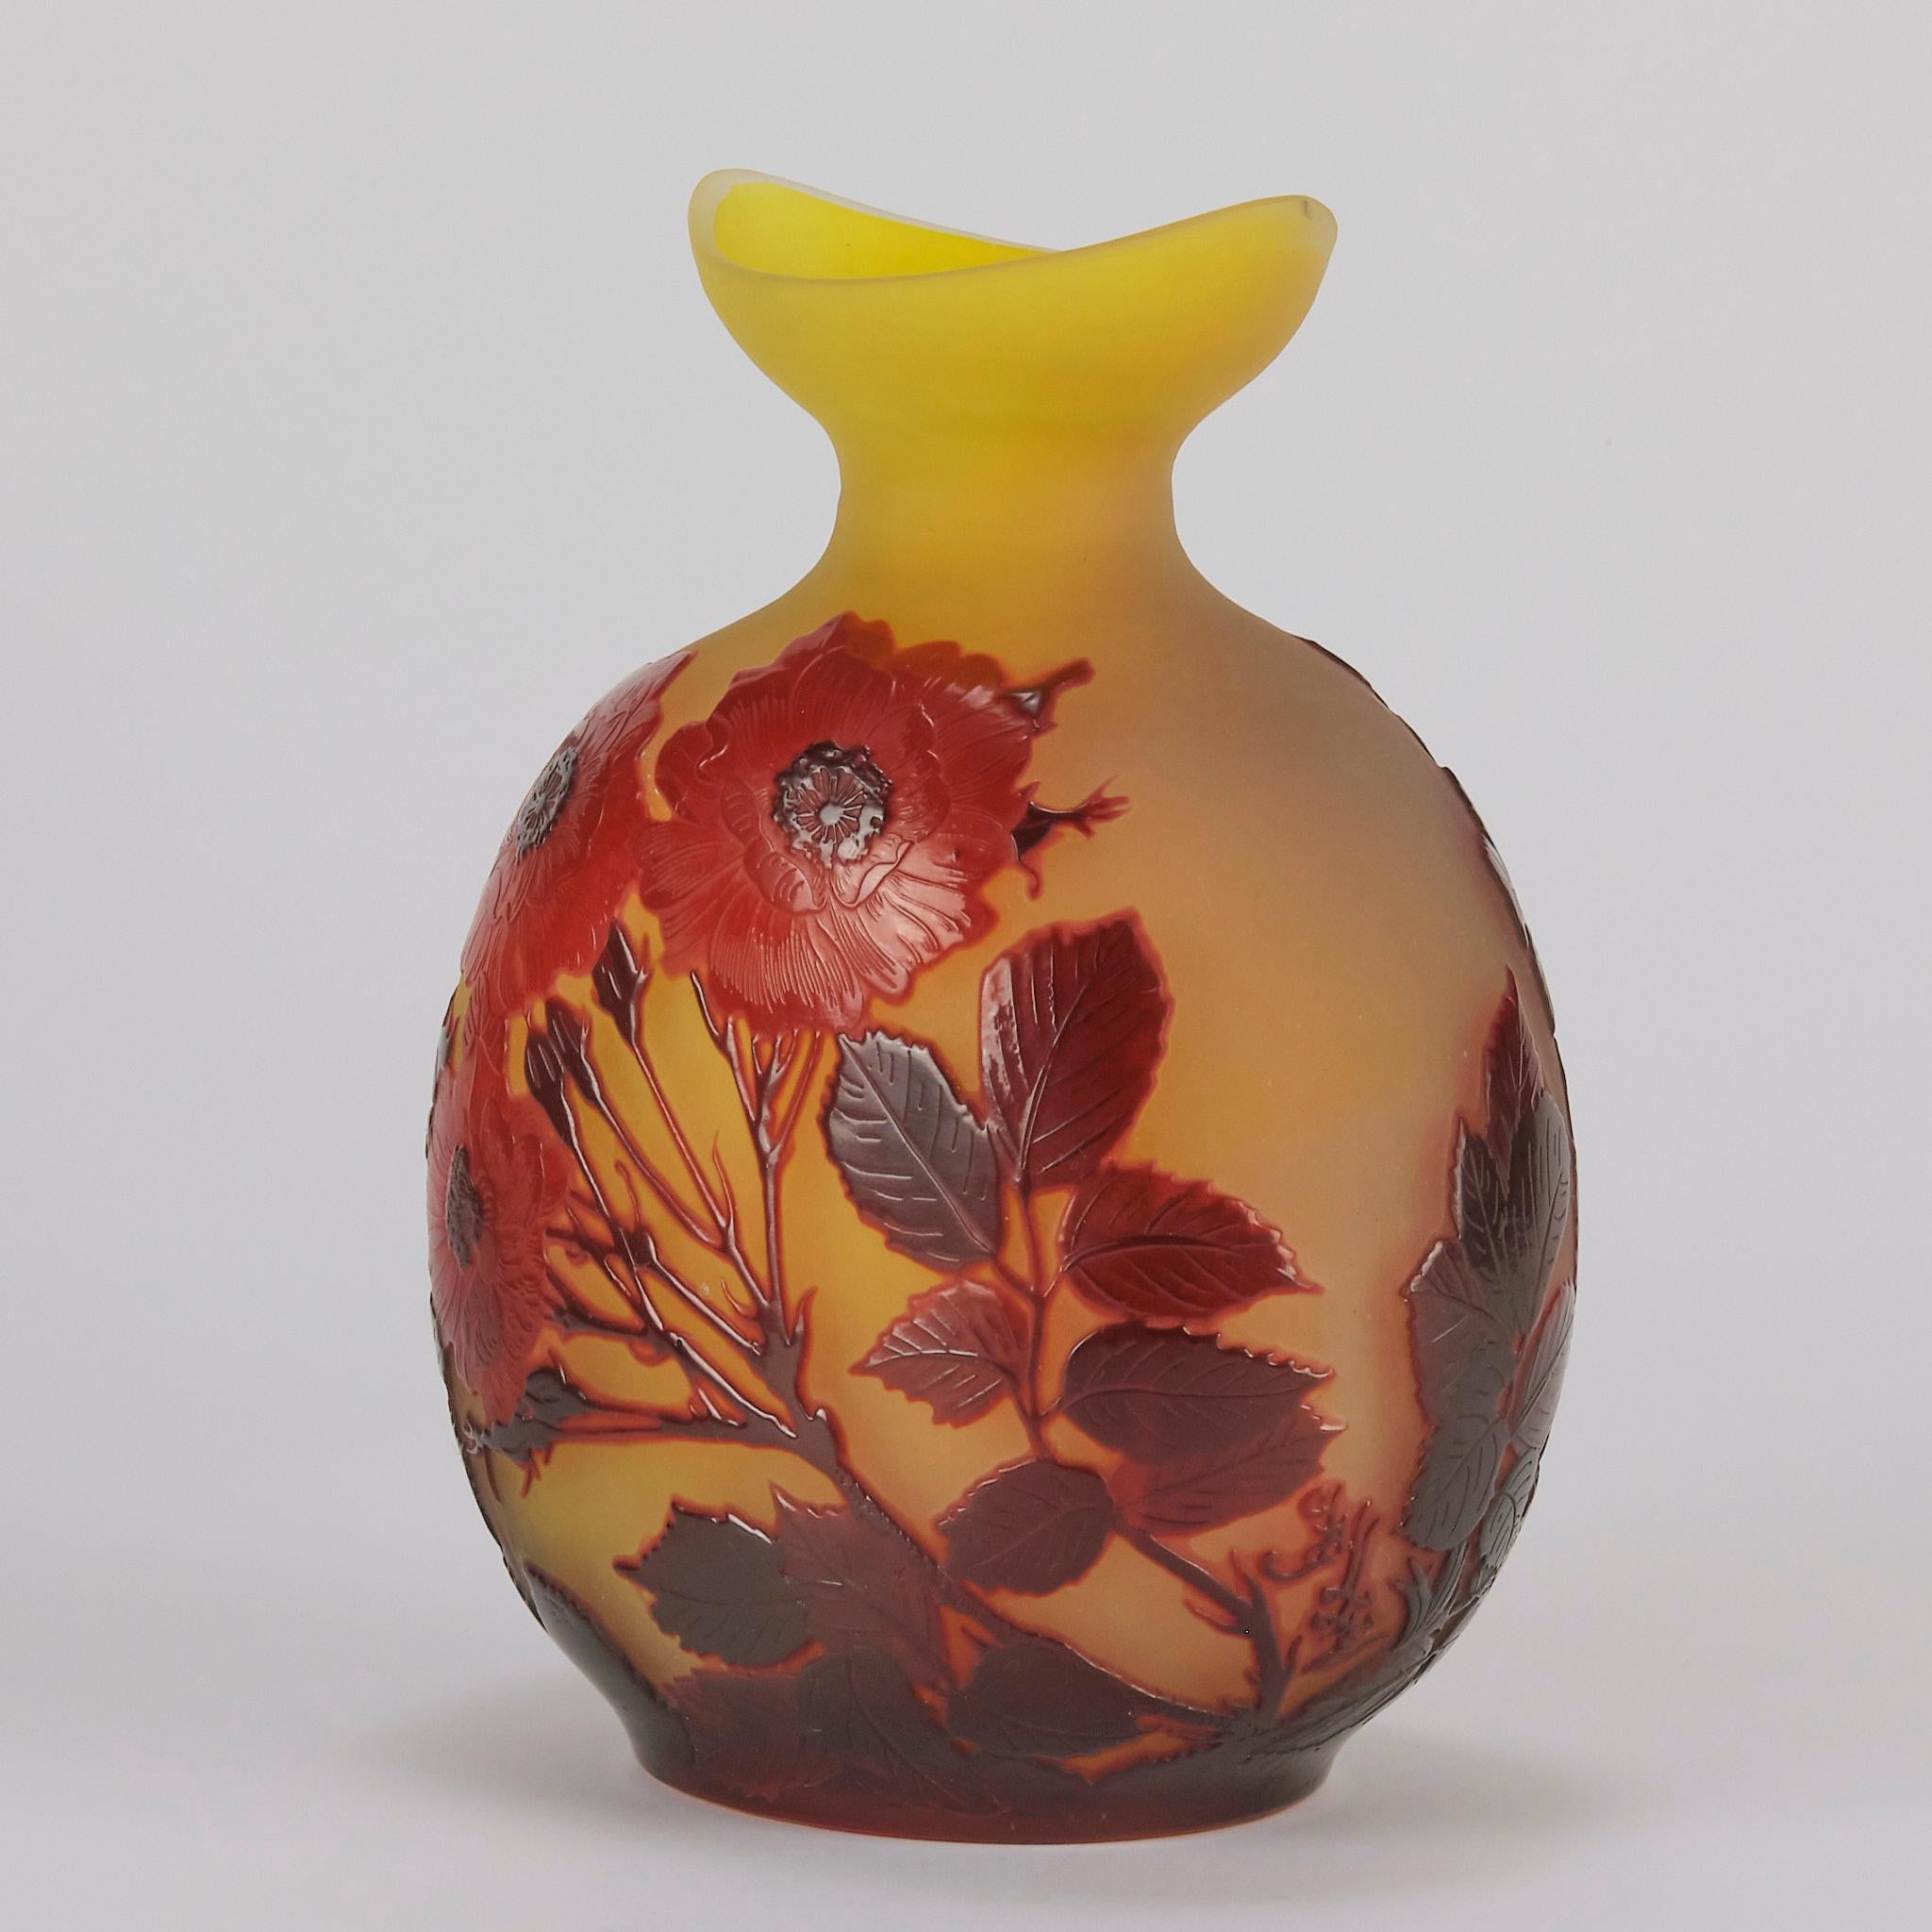 A beautiful early 20th Century cameo glass vase acid cut and etched with a deep red floral decoration against a yellow background. With a crescent moon at the openning of the vase. Exhibiting very fine hand finised surface detail and vibrant colour,